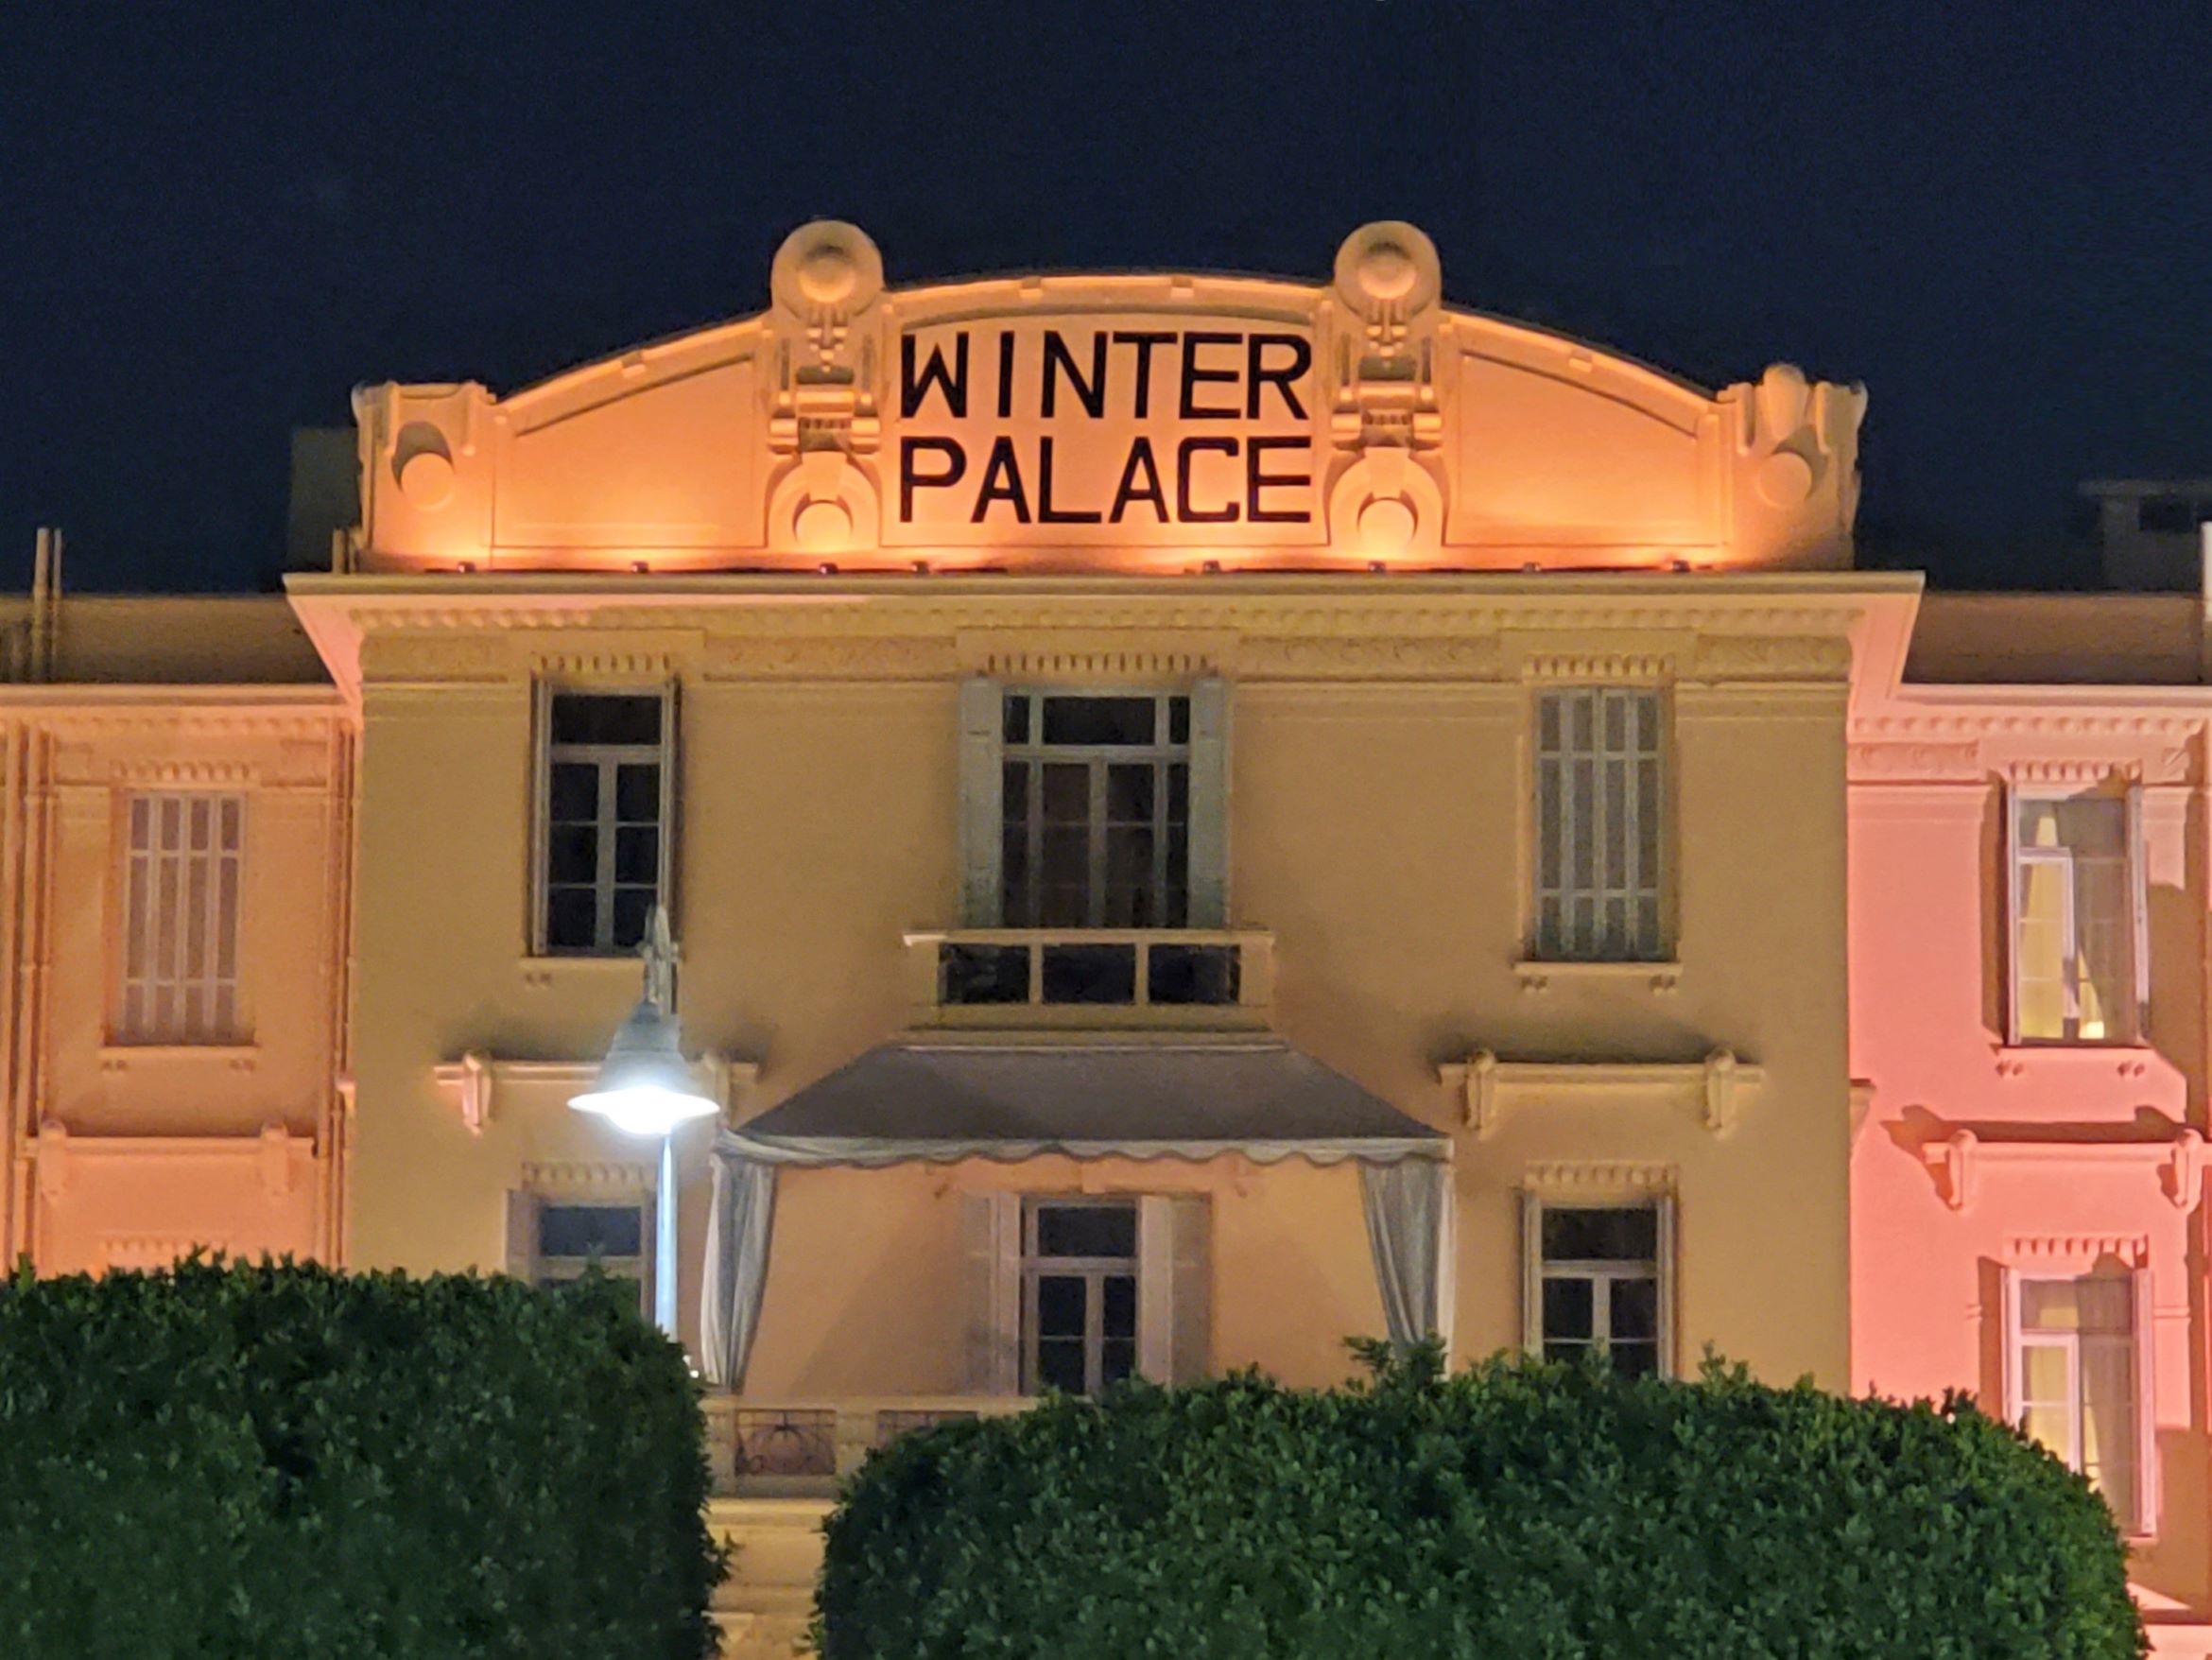 The front of the Old Winter Palace Hotel at Night